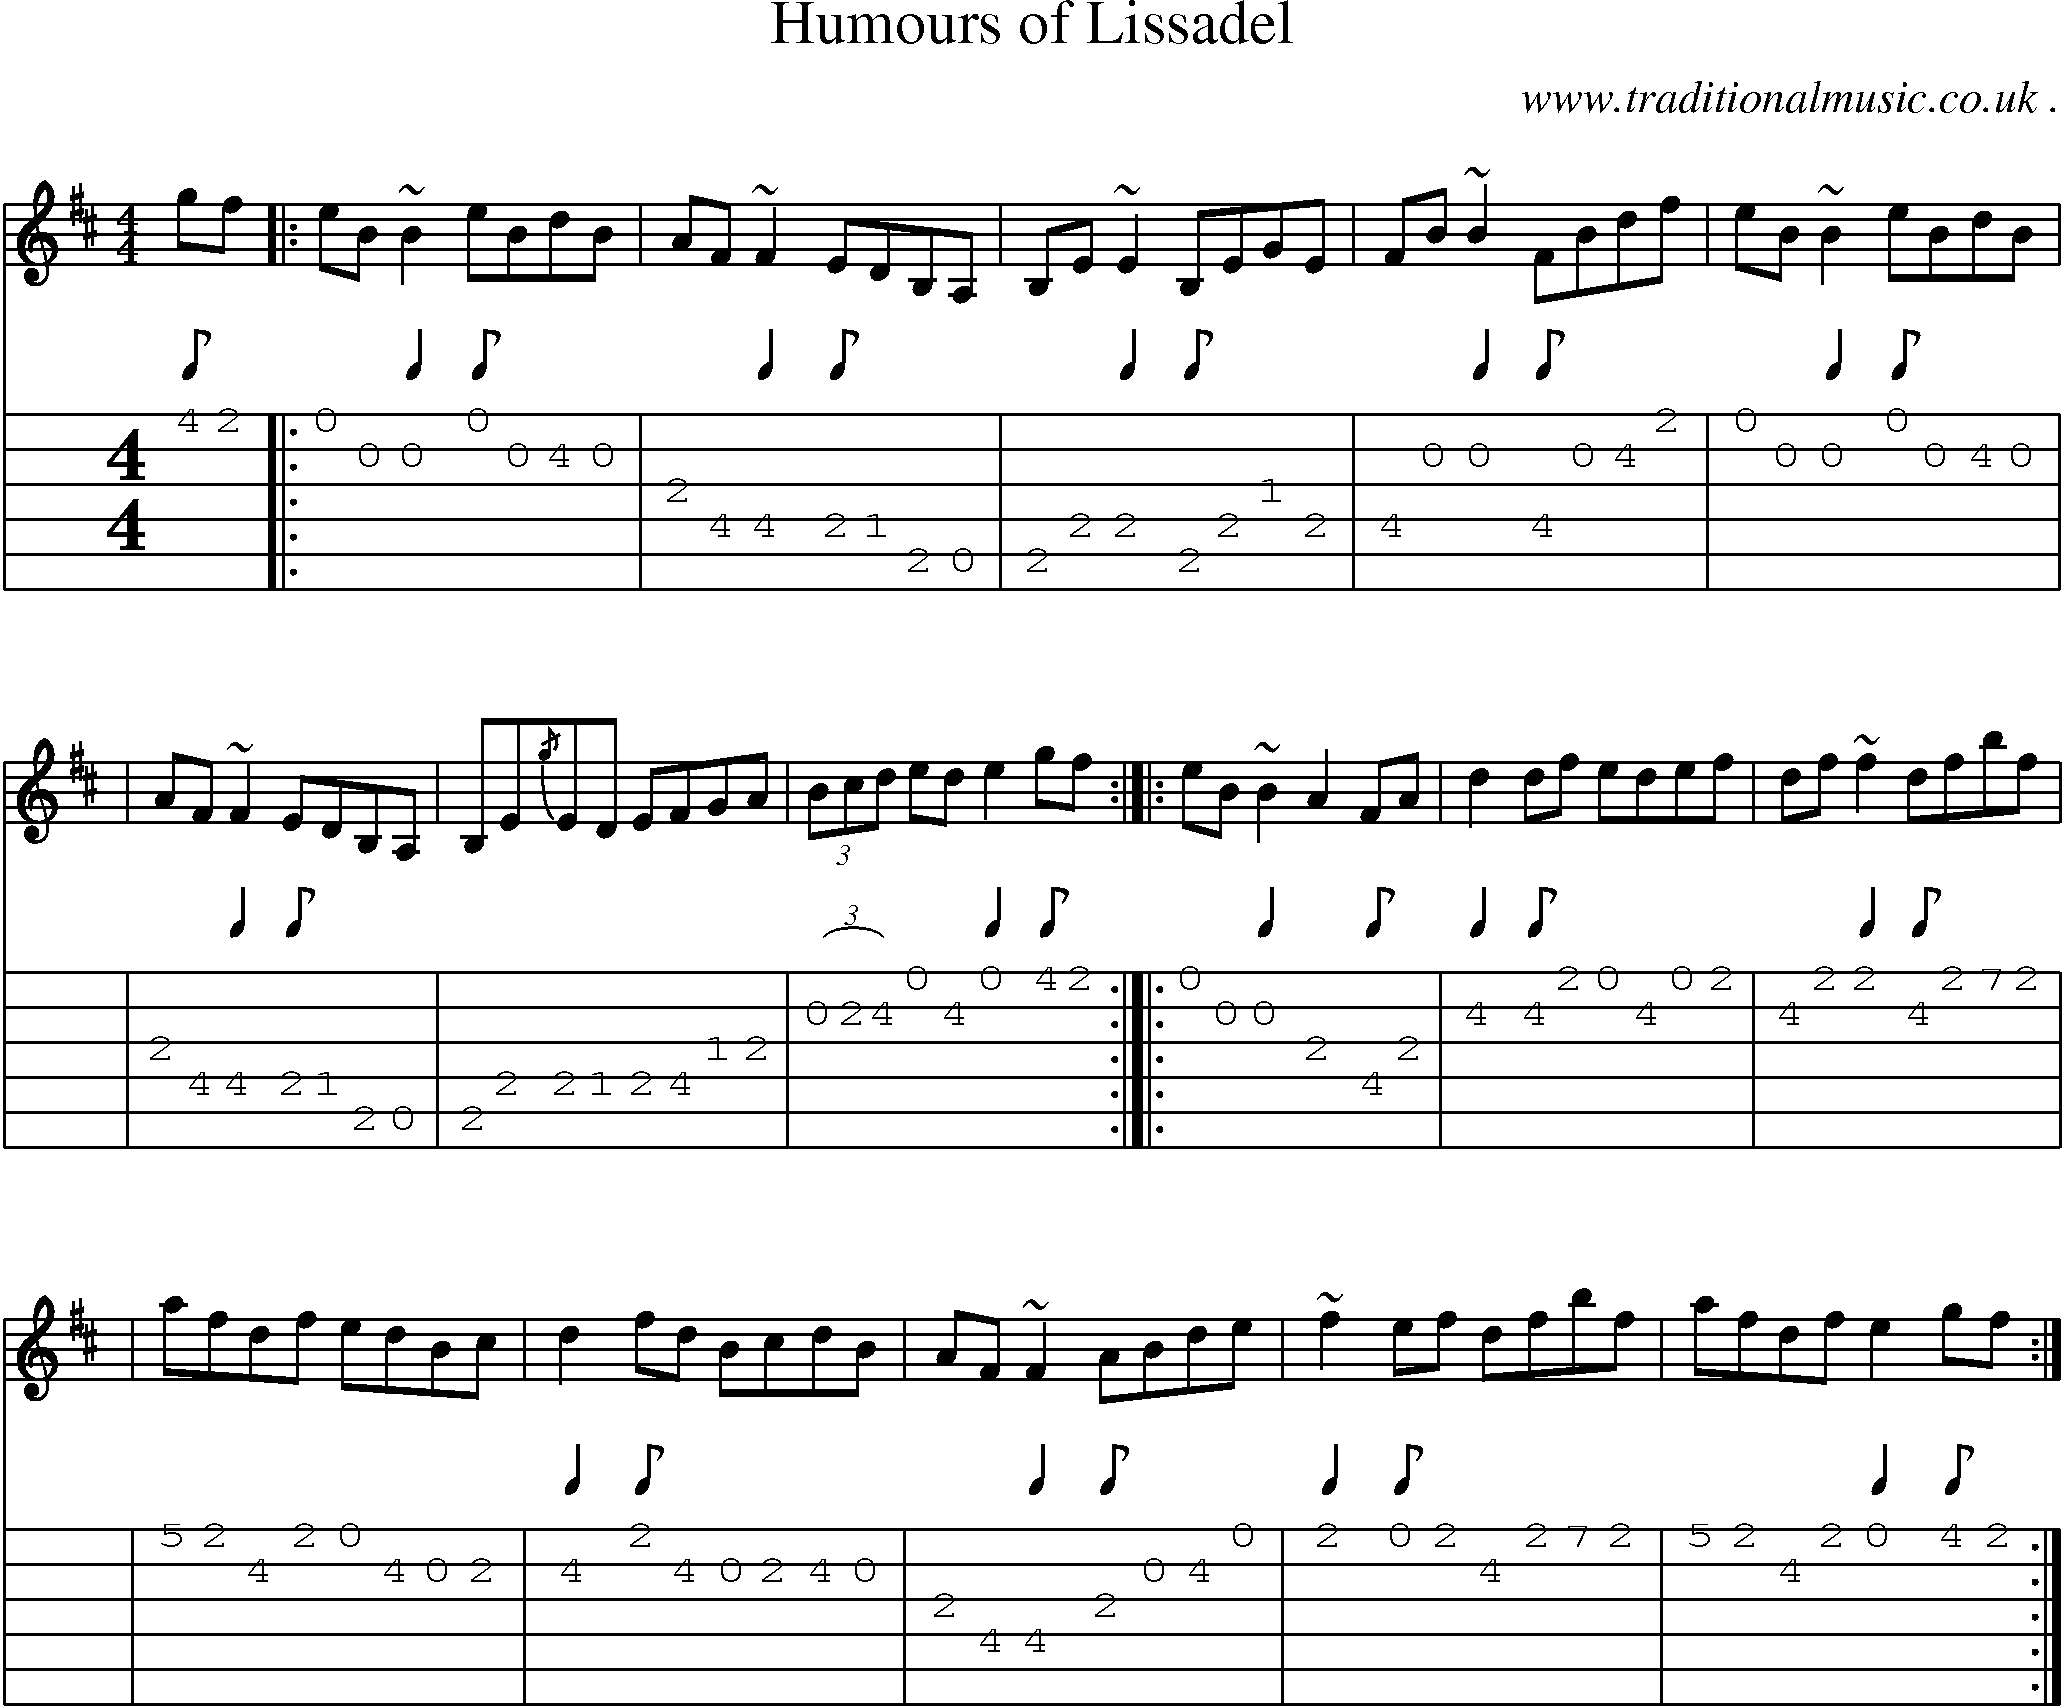 Sheet-music  score, Chords and Guitar Tabs for Humours Of Lissadel